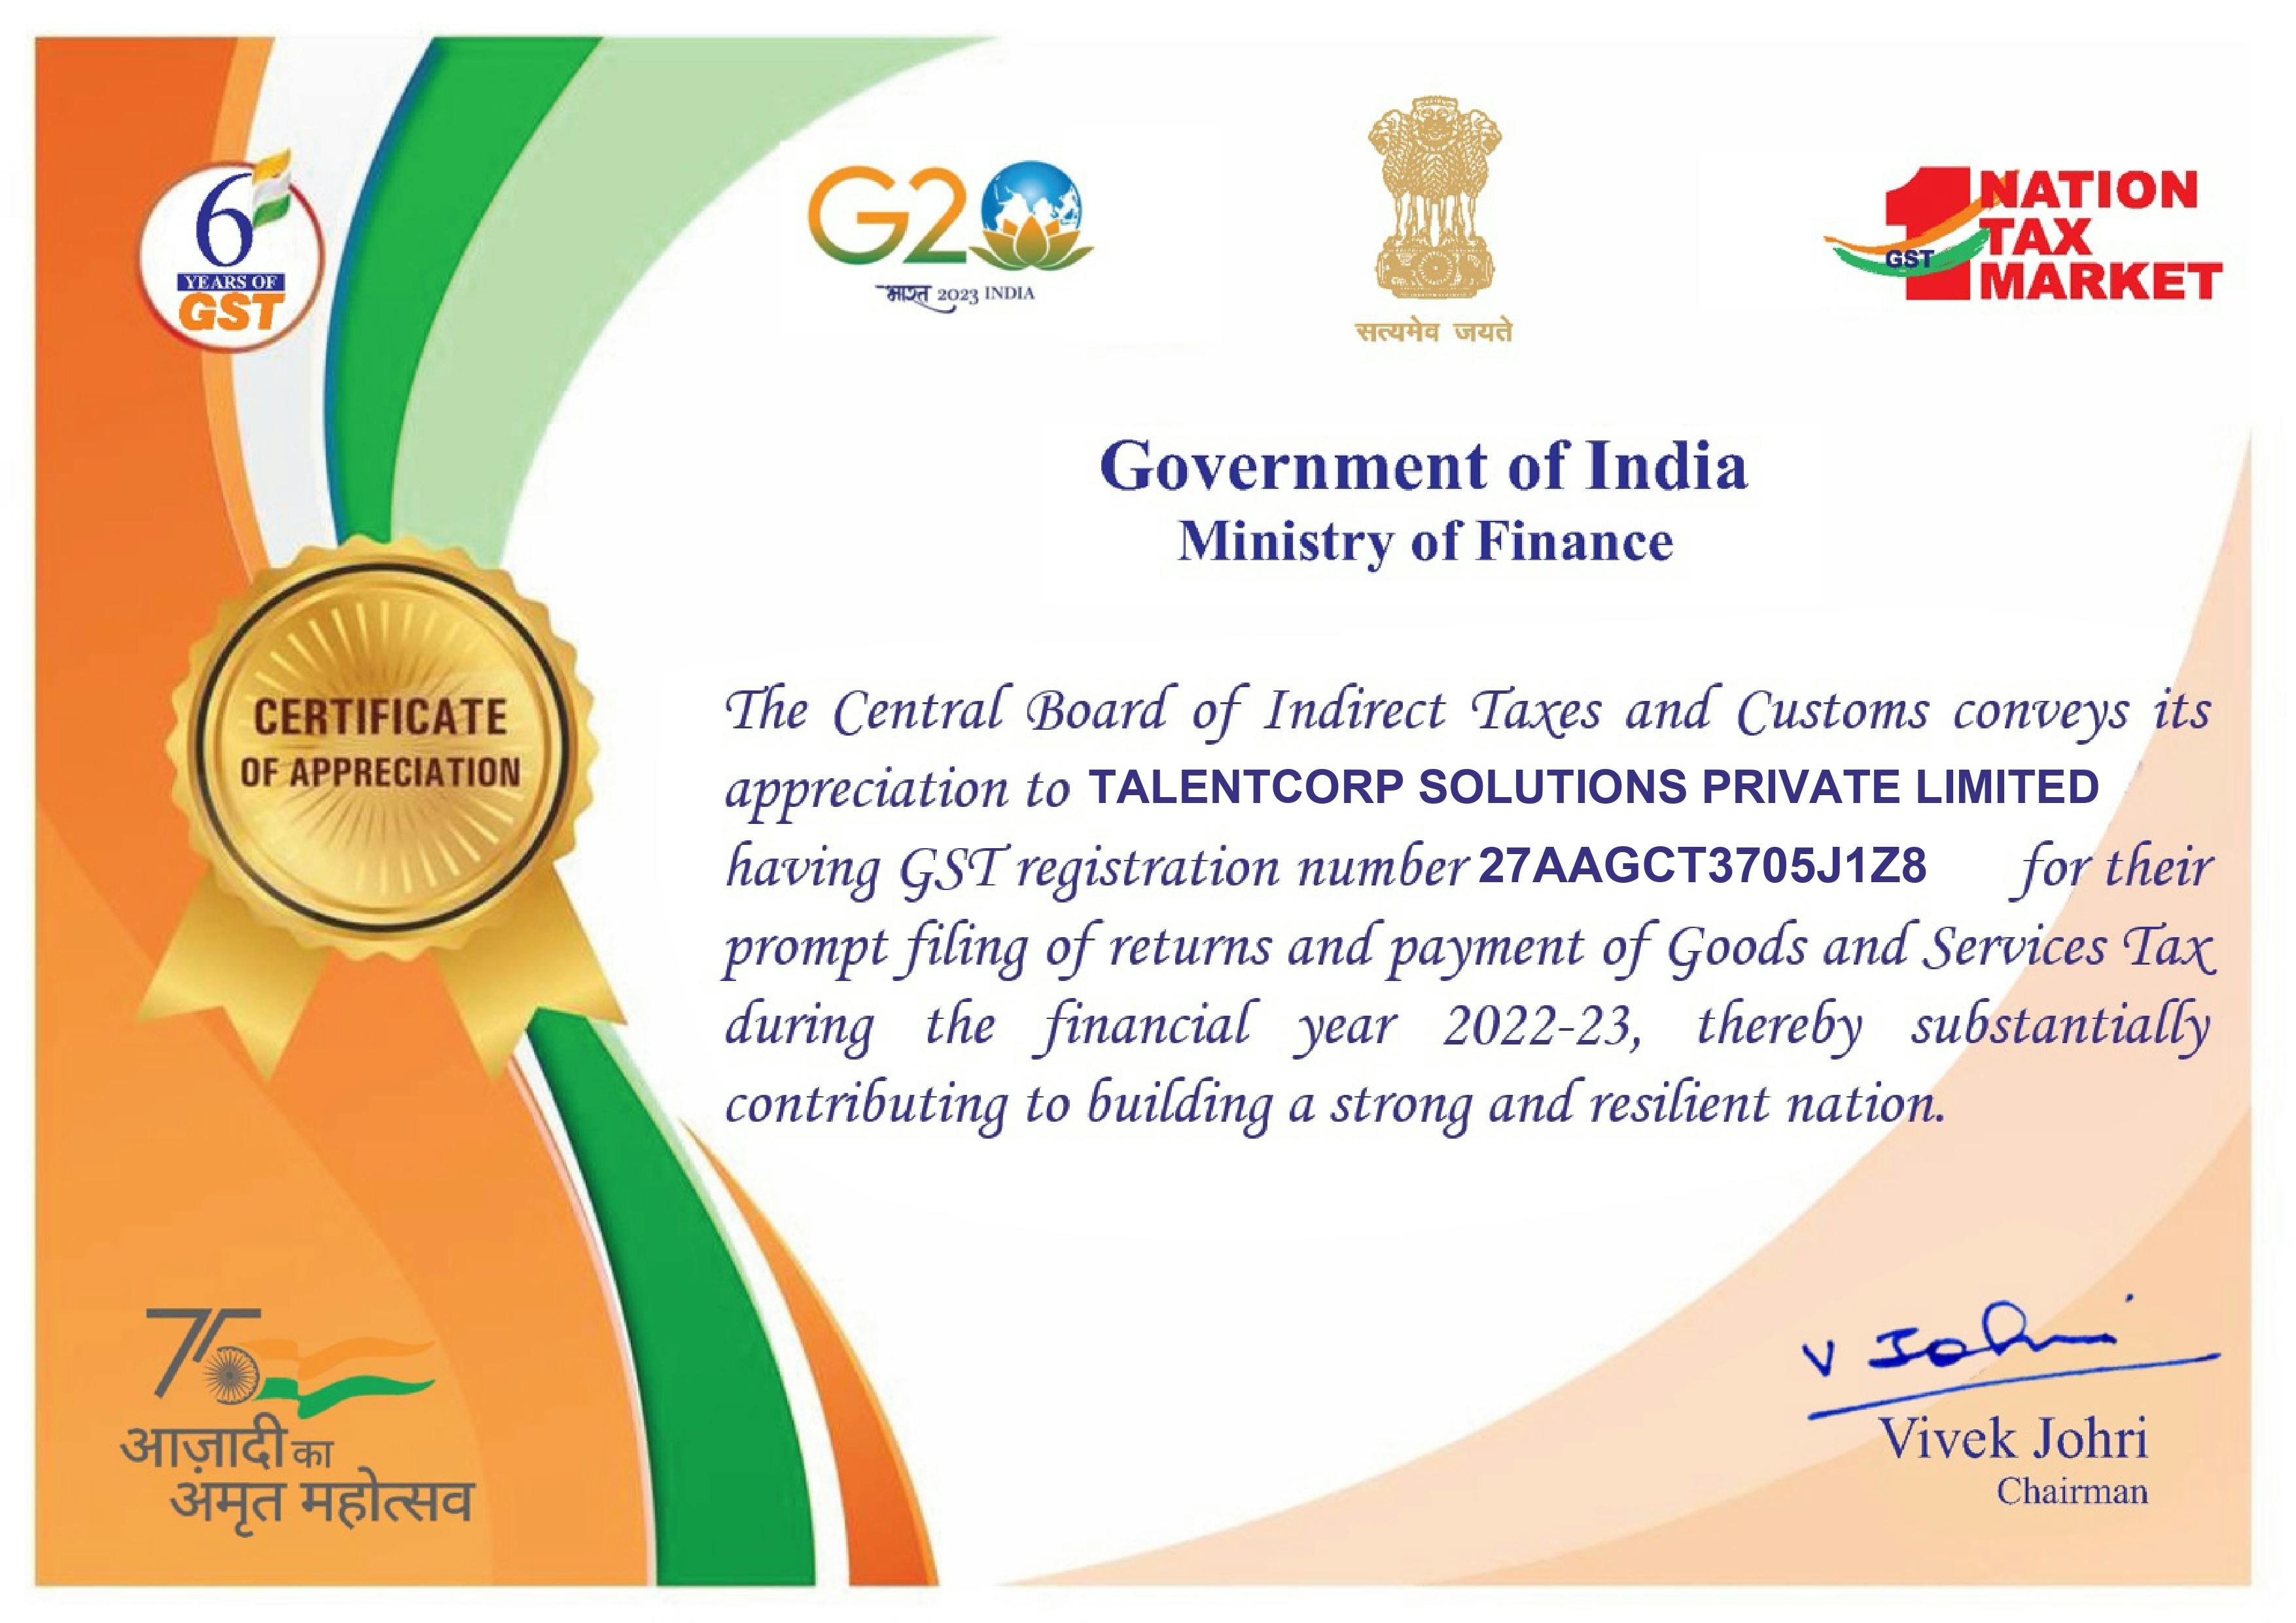 TSPL Group Awarded Certificate of Appreciation for Exemplary GST Compliance